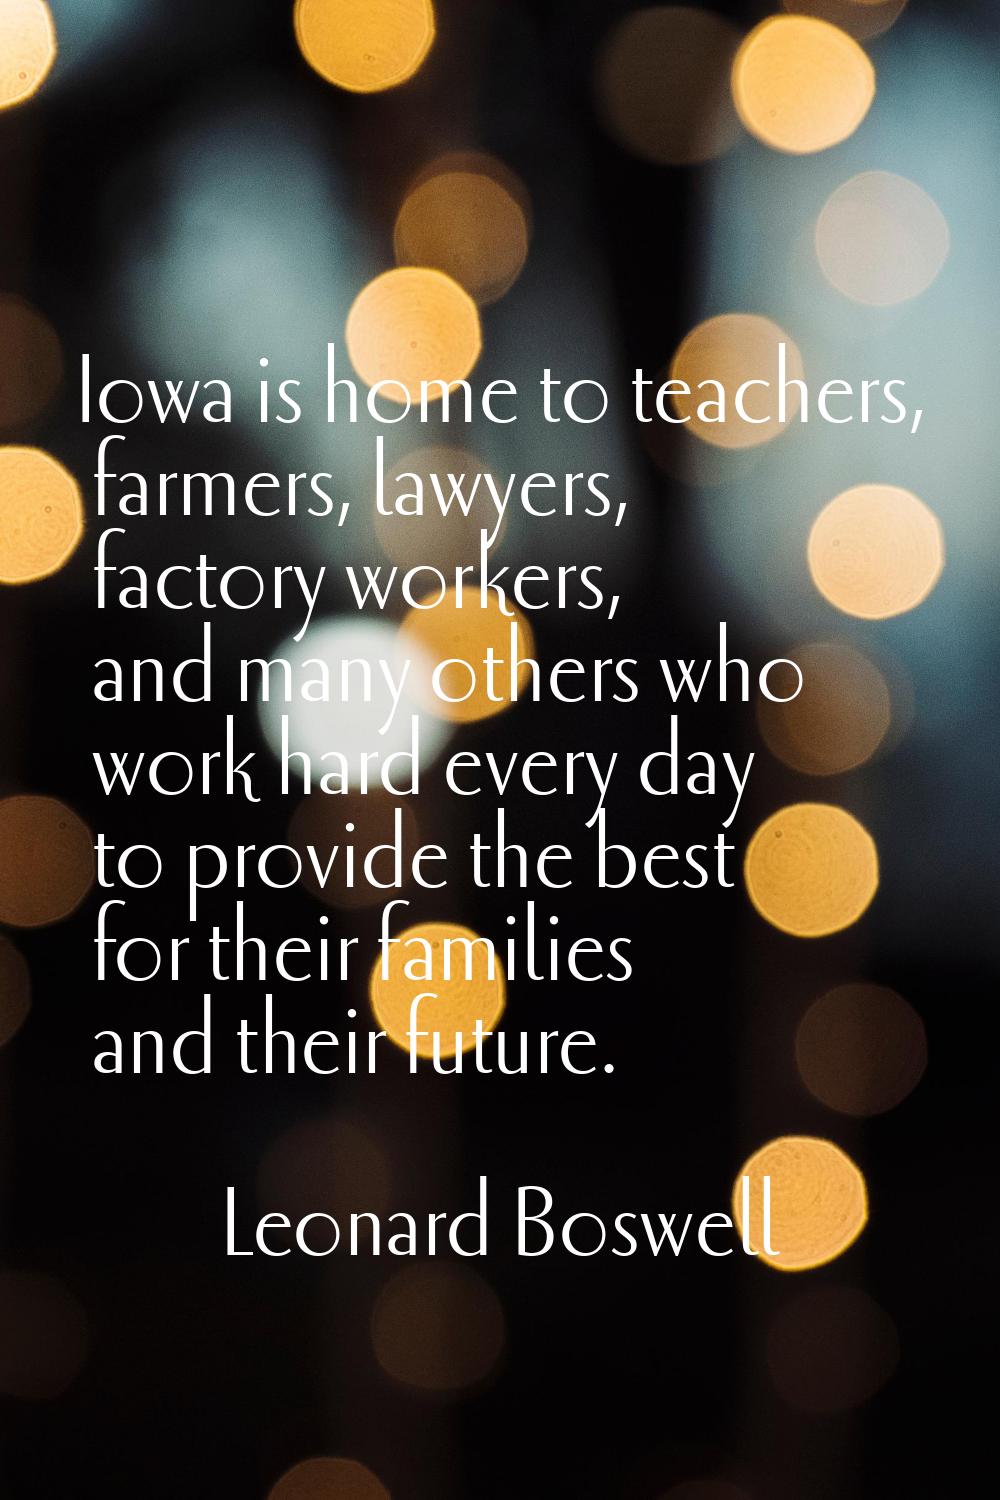 Iowa is home to teachers, farmers, lawyers, factory workers, and many others who work hard every da